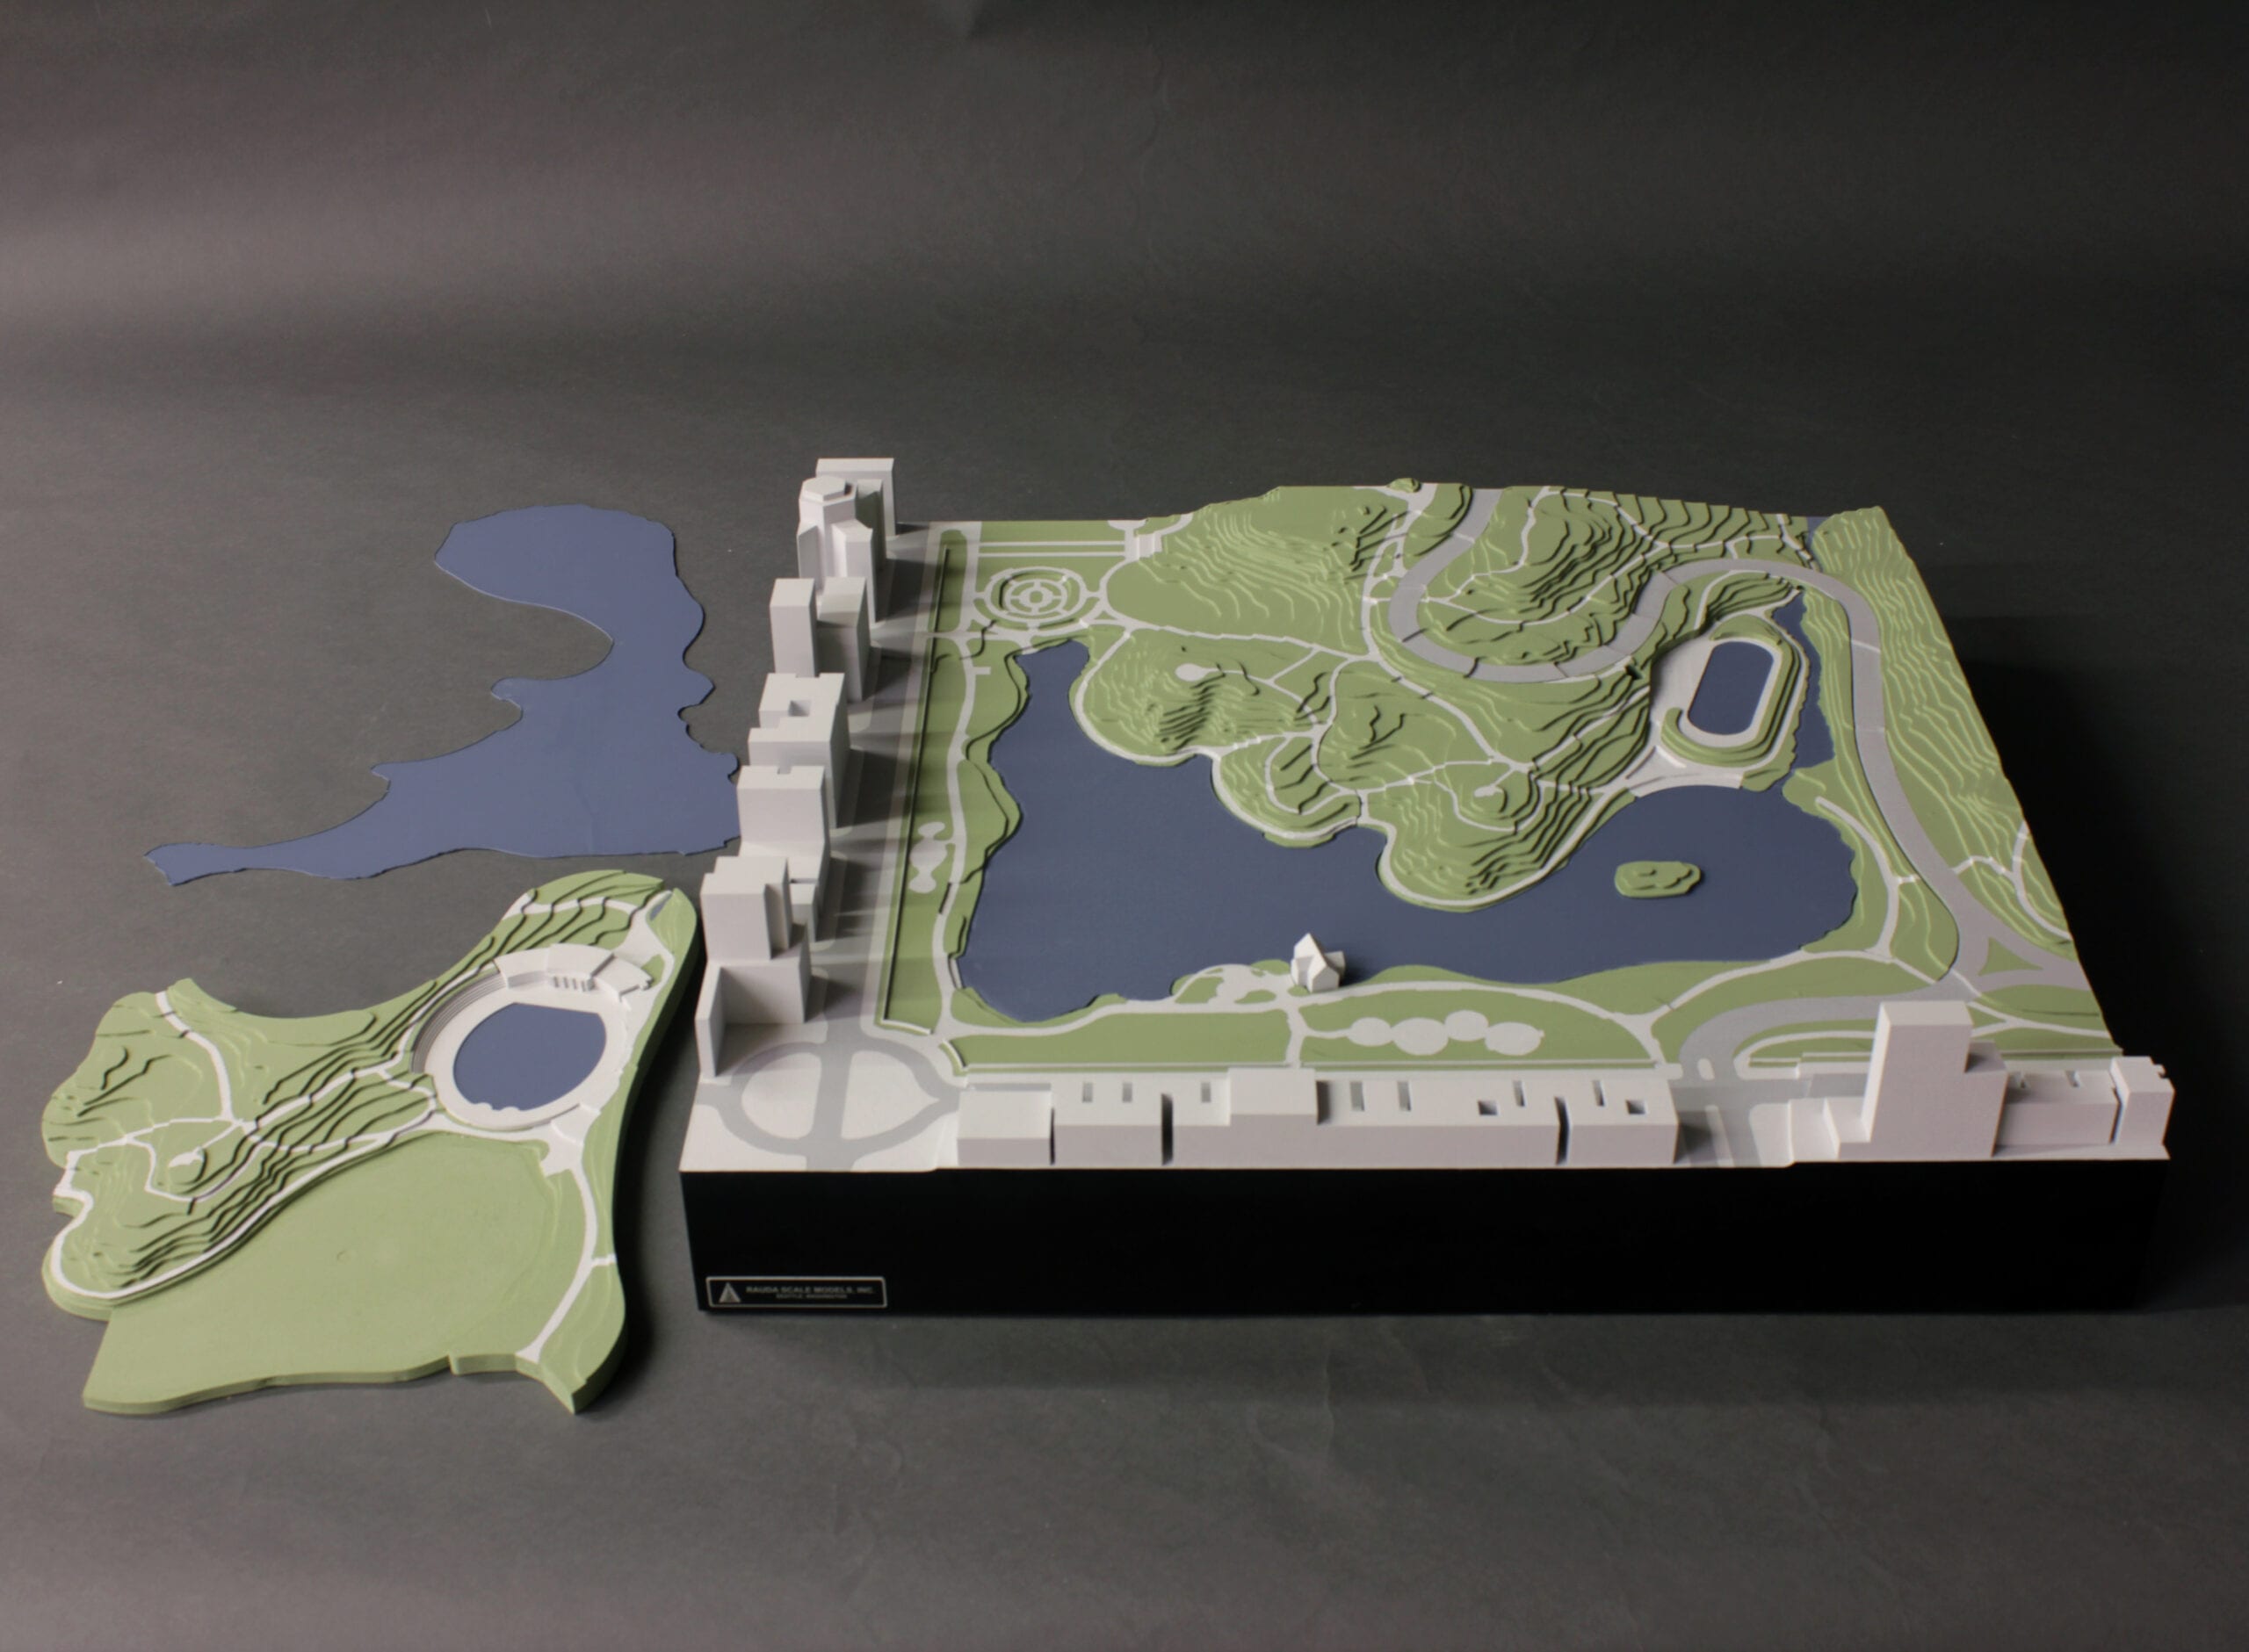 Architectural scale model of one design alternative for the North end of New York's Central Park